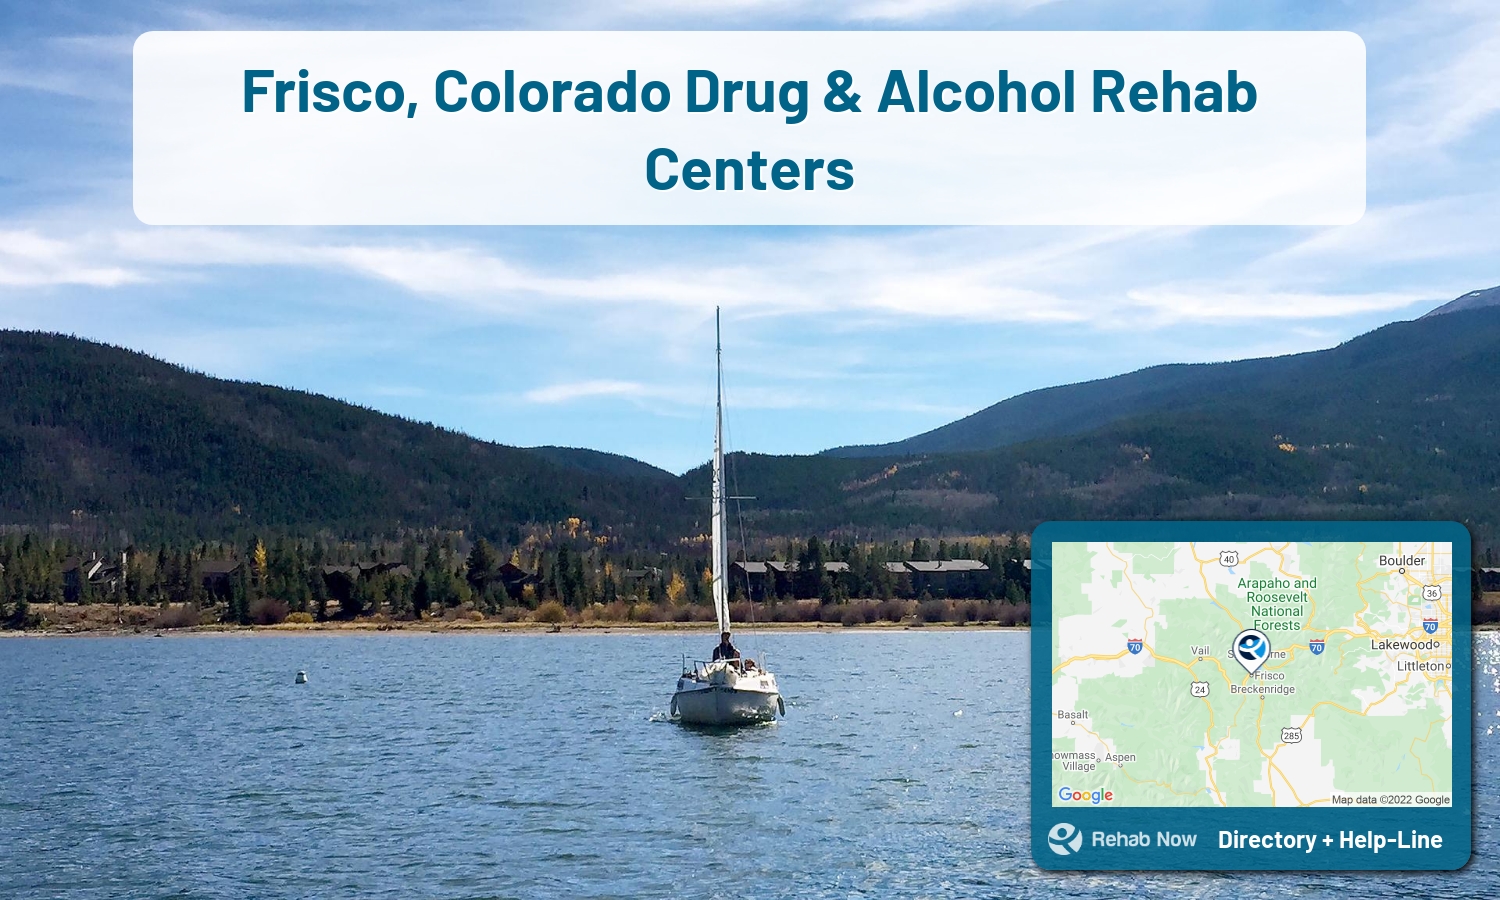 Frisco, CO Treatment Centers. Find drug rehab in Frisco, Colorado, or detox and treatment programs. Get the right help now!